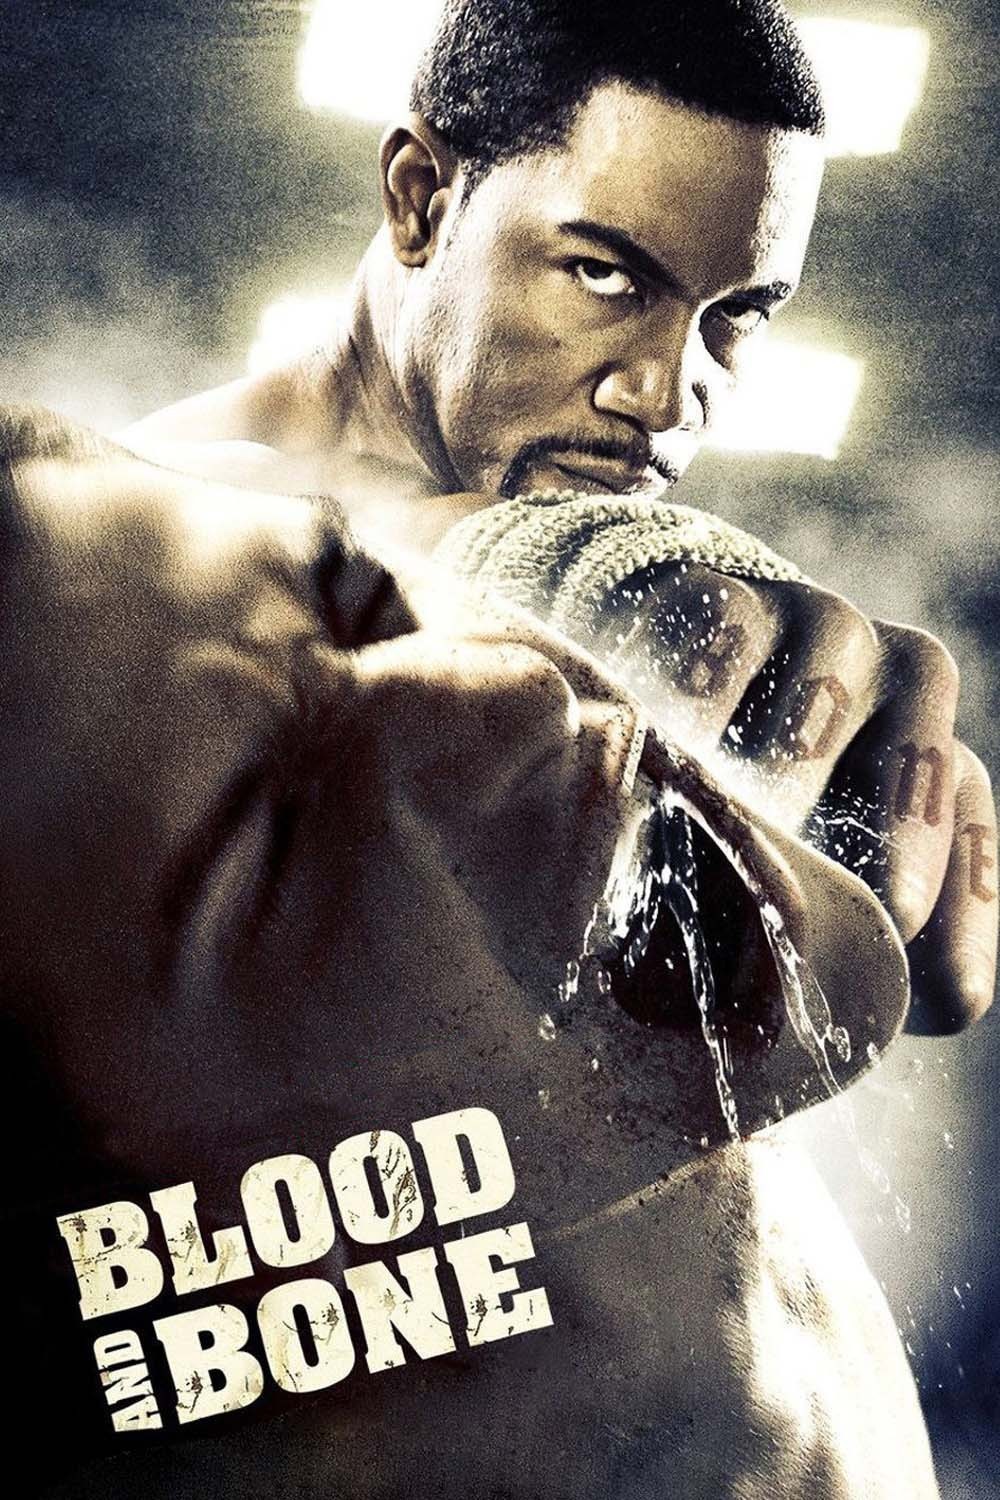 Blood and bone 2 full movie free download pc